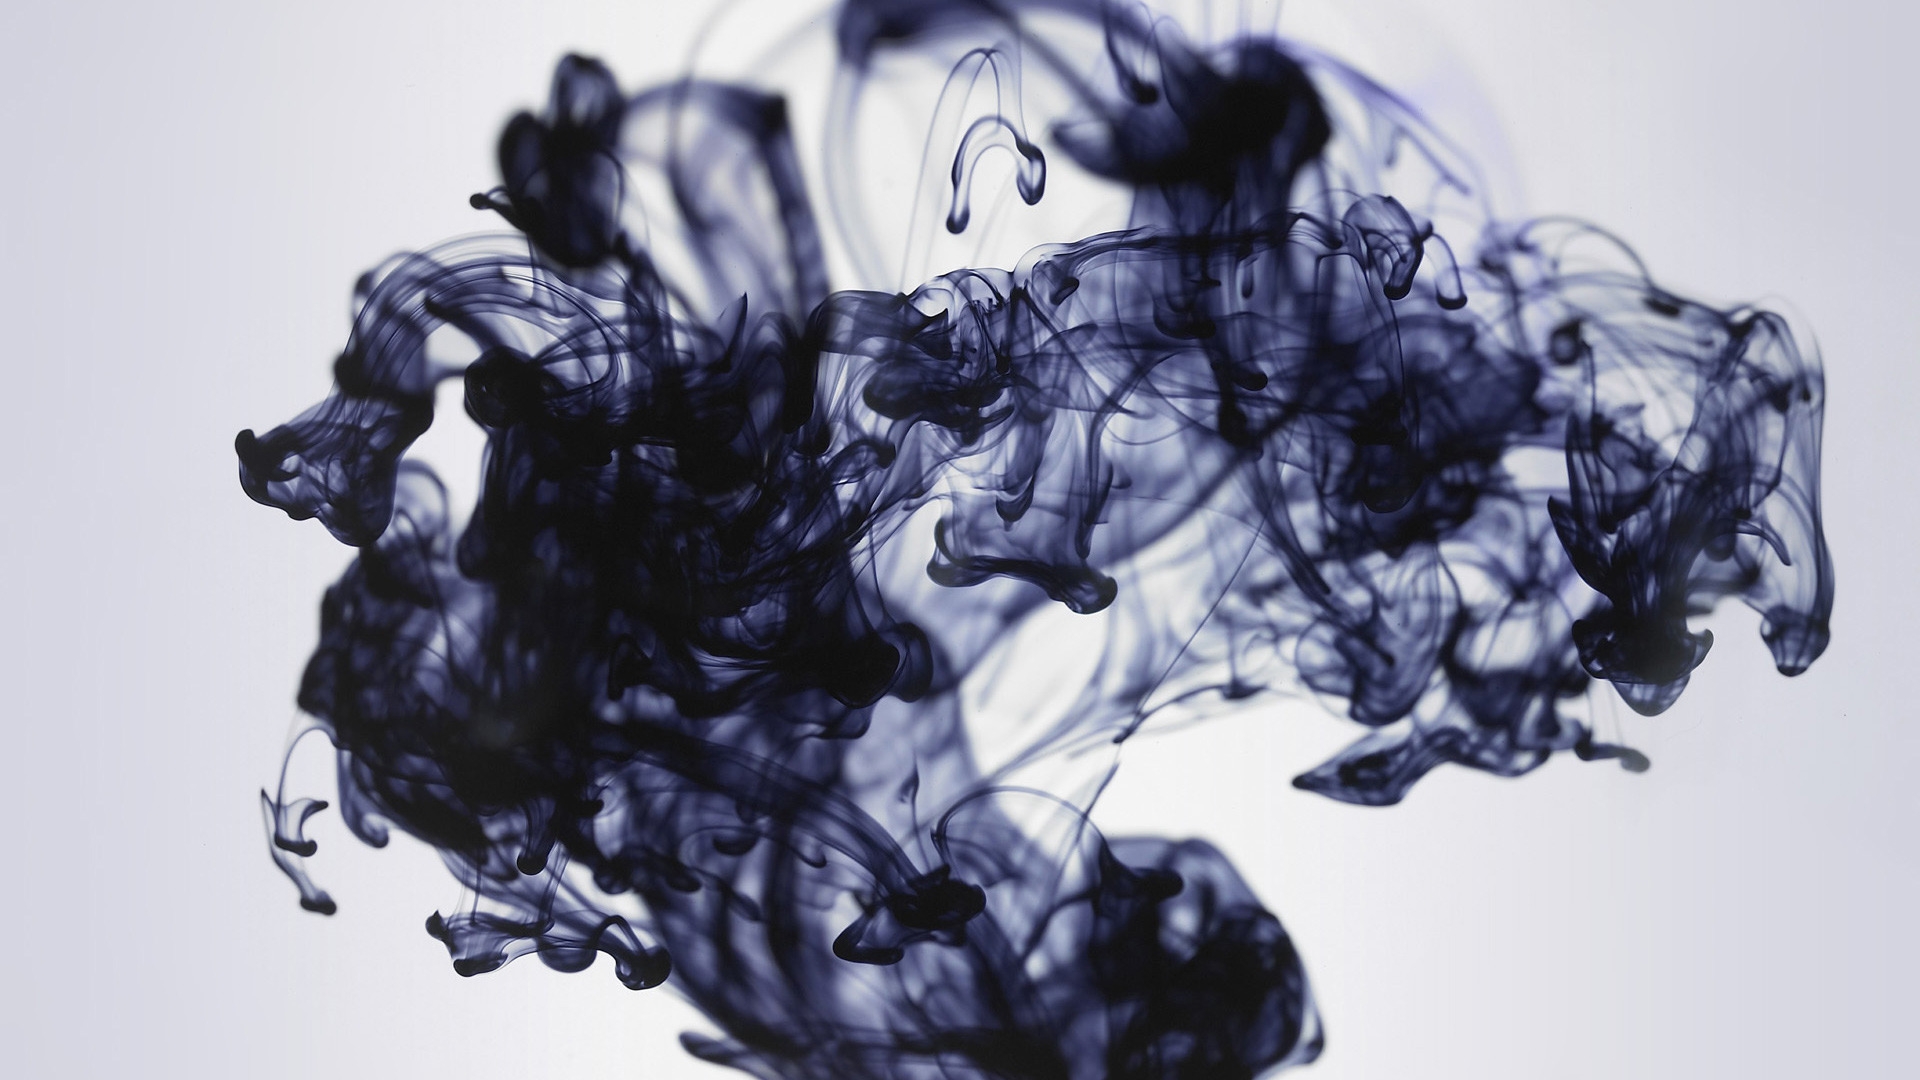 Ink Smoke for 1920 x 1080 HDTV 1080p resolution